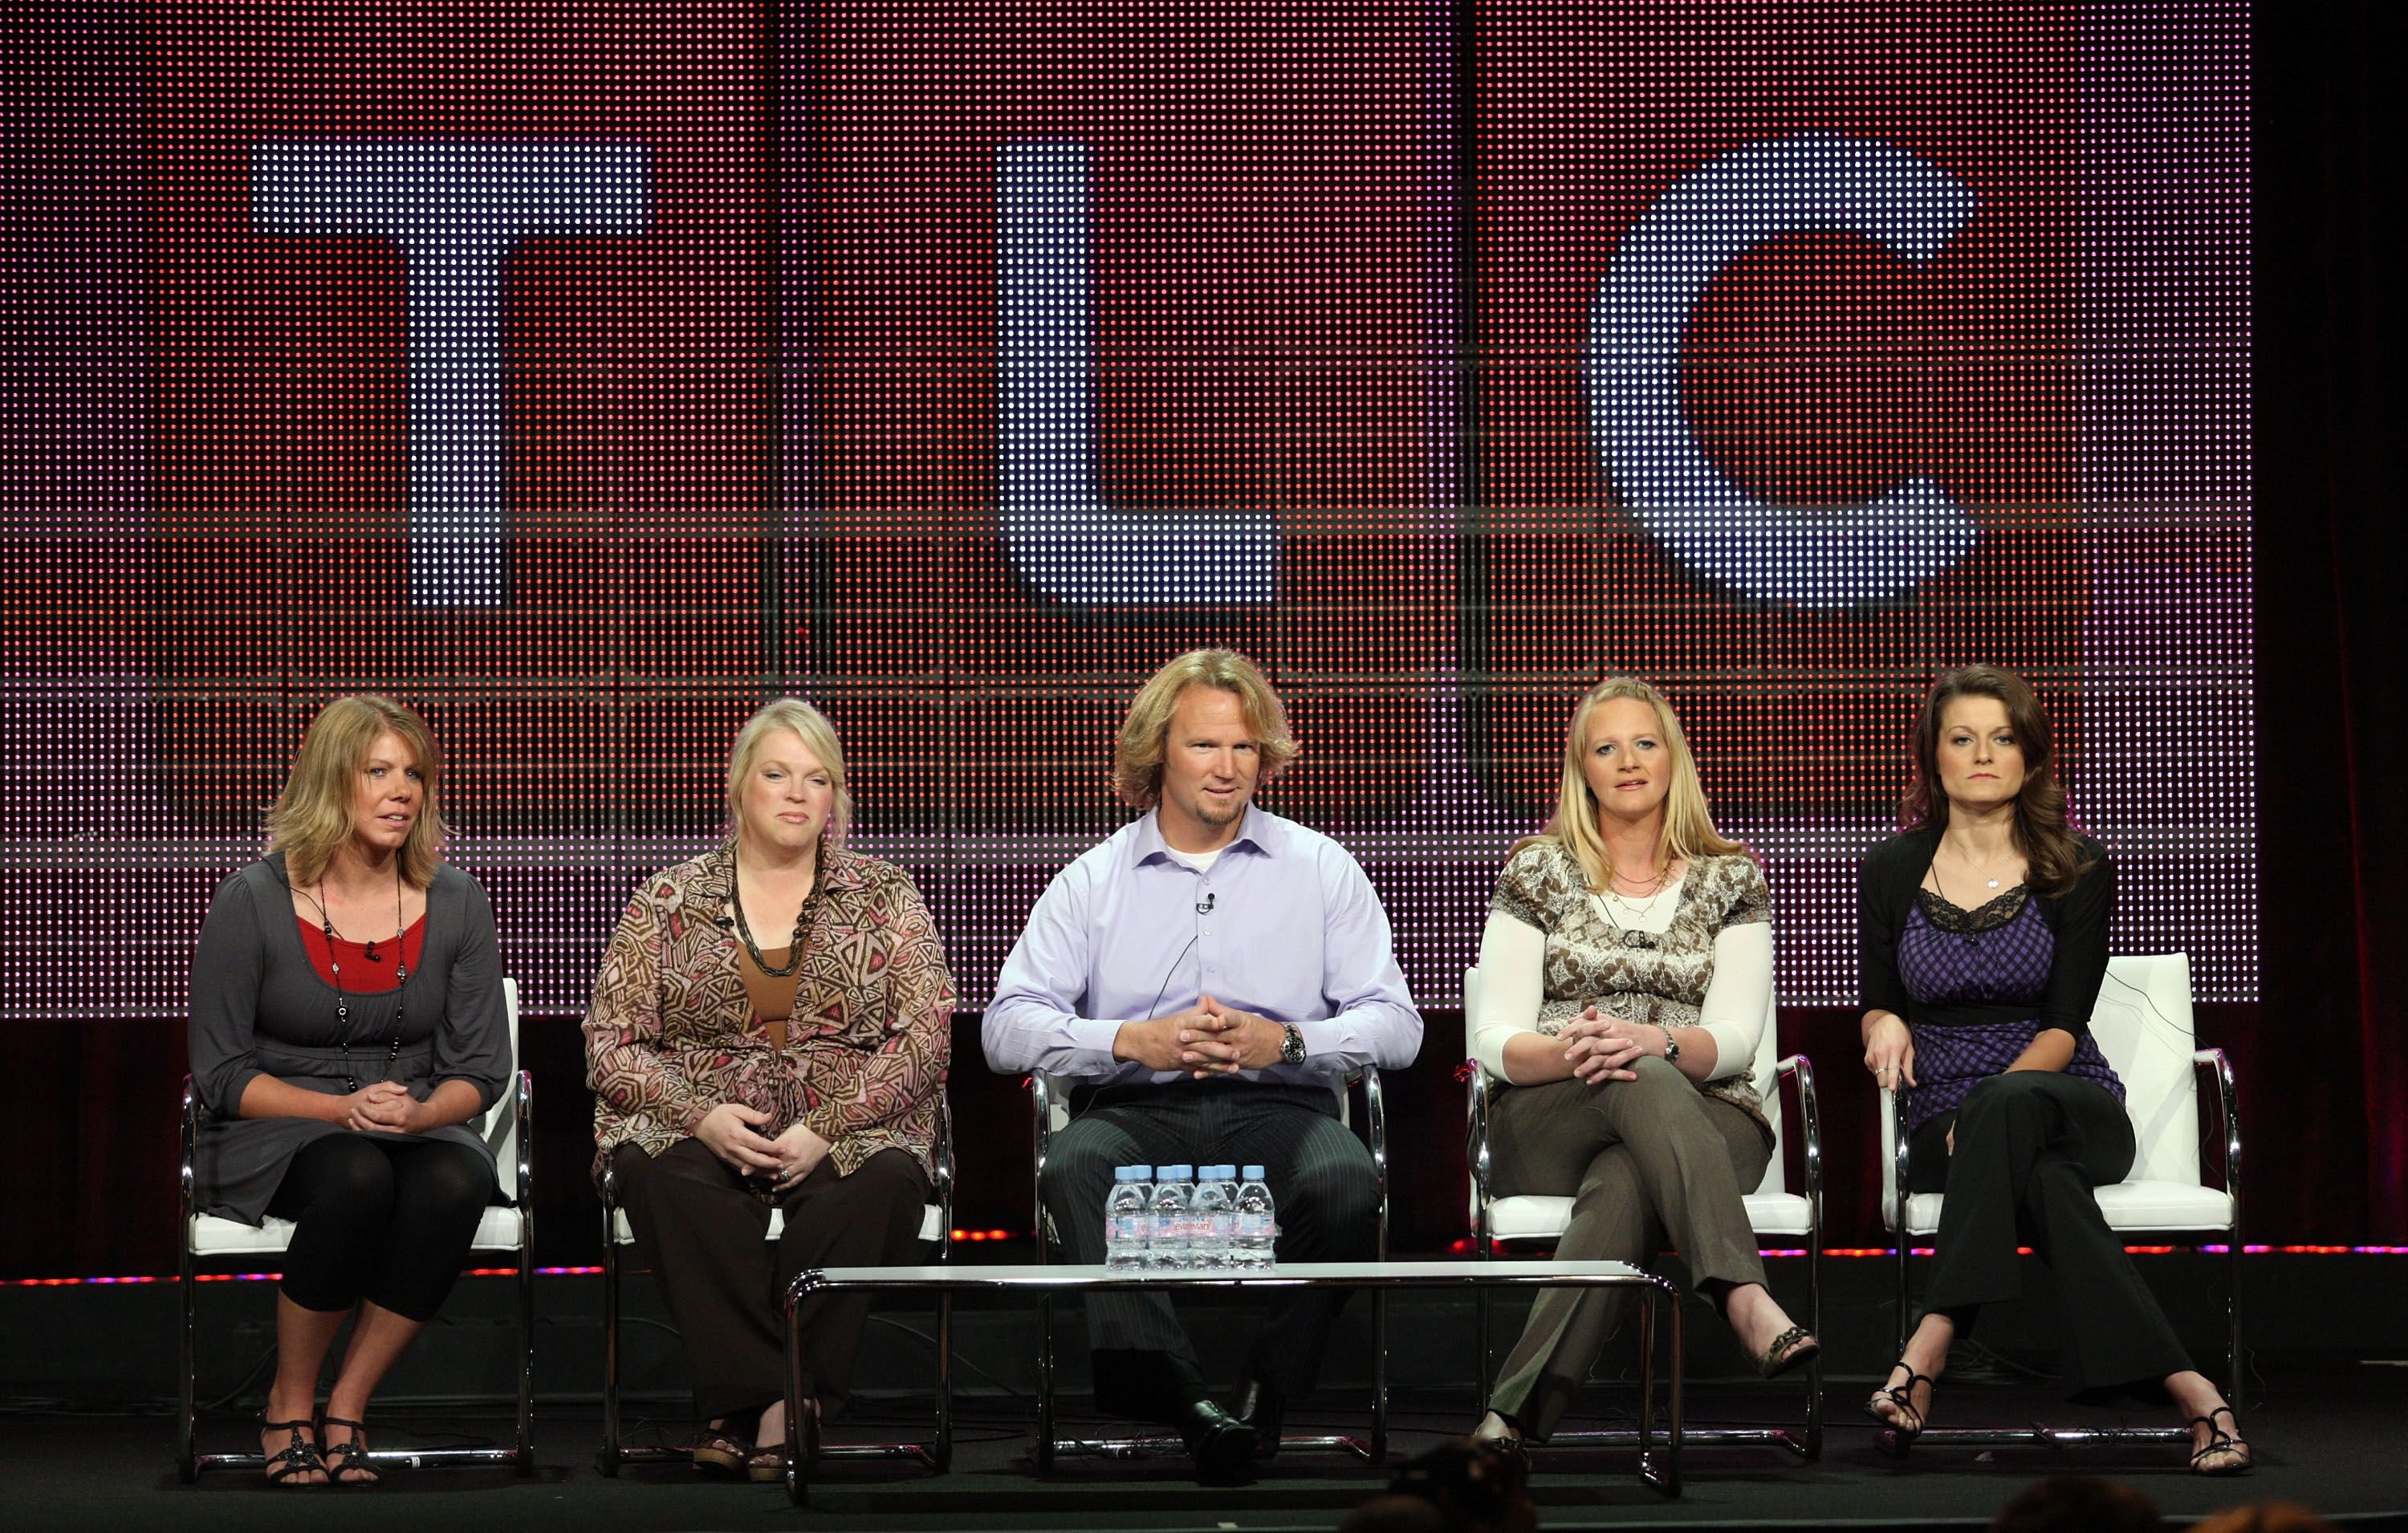 Meri, Janelle, Kody, Christine, and Robyn Brown from "Sister Wives" during the panel on the Summer TCA press tour on August 6, 2010 | Getty Images 